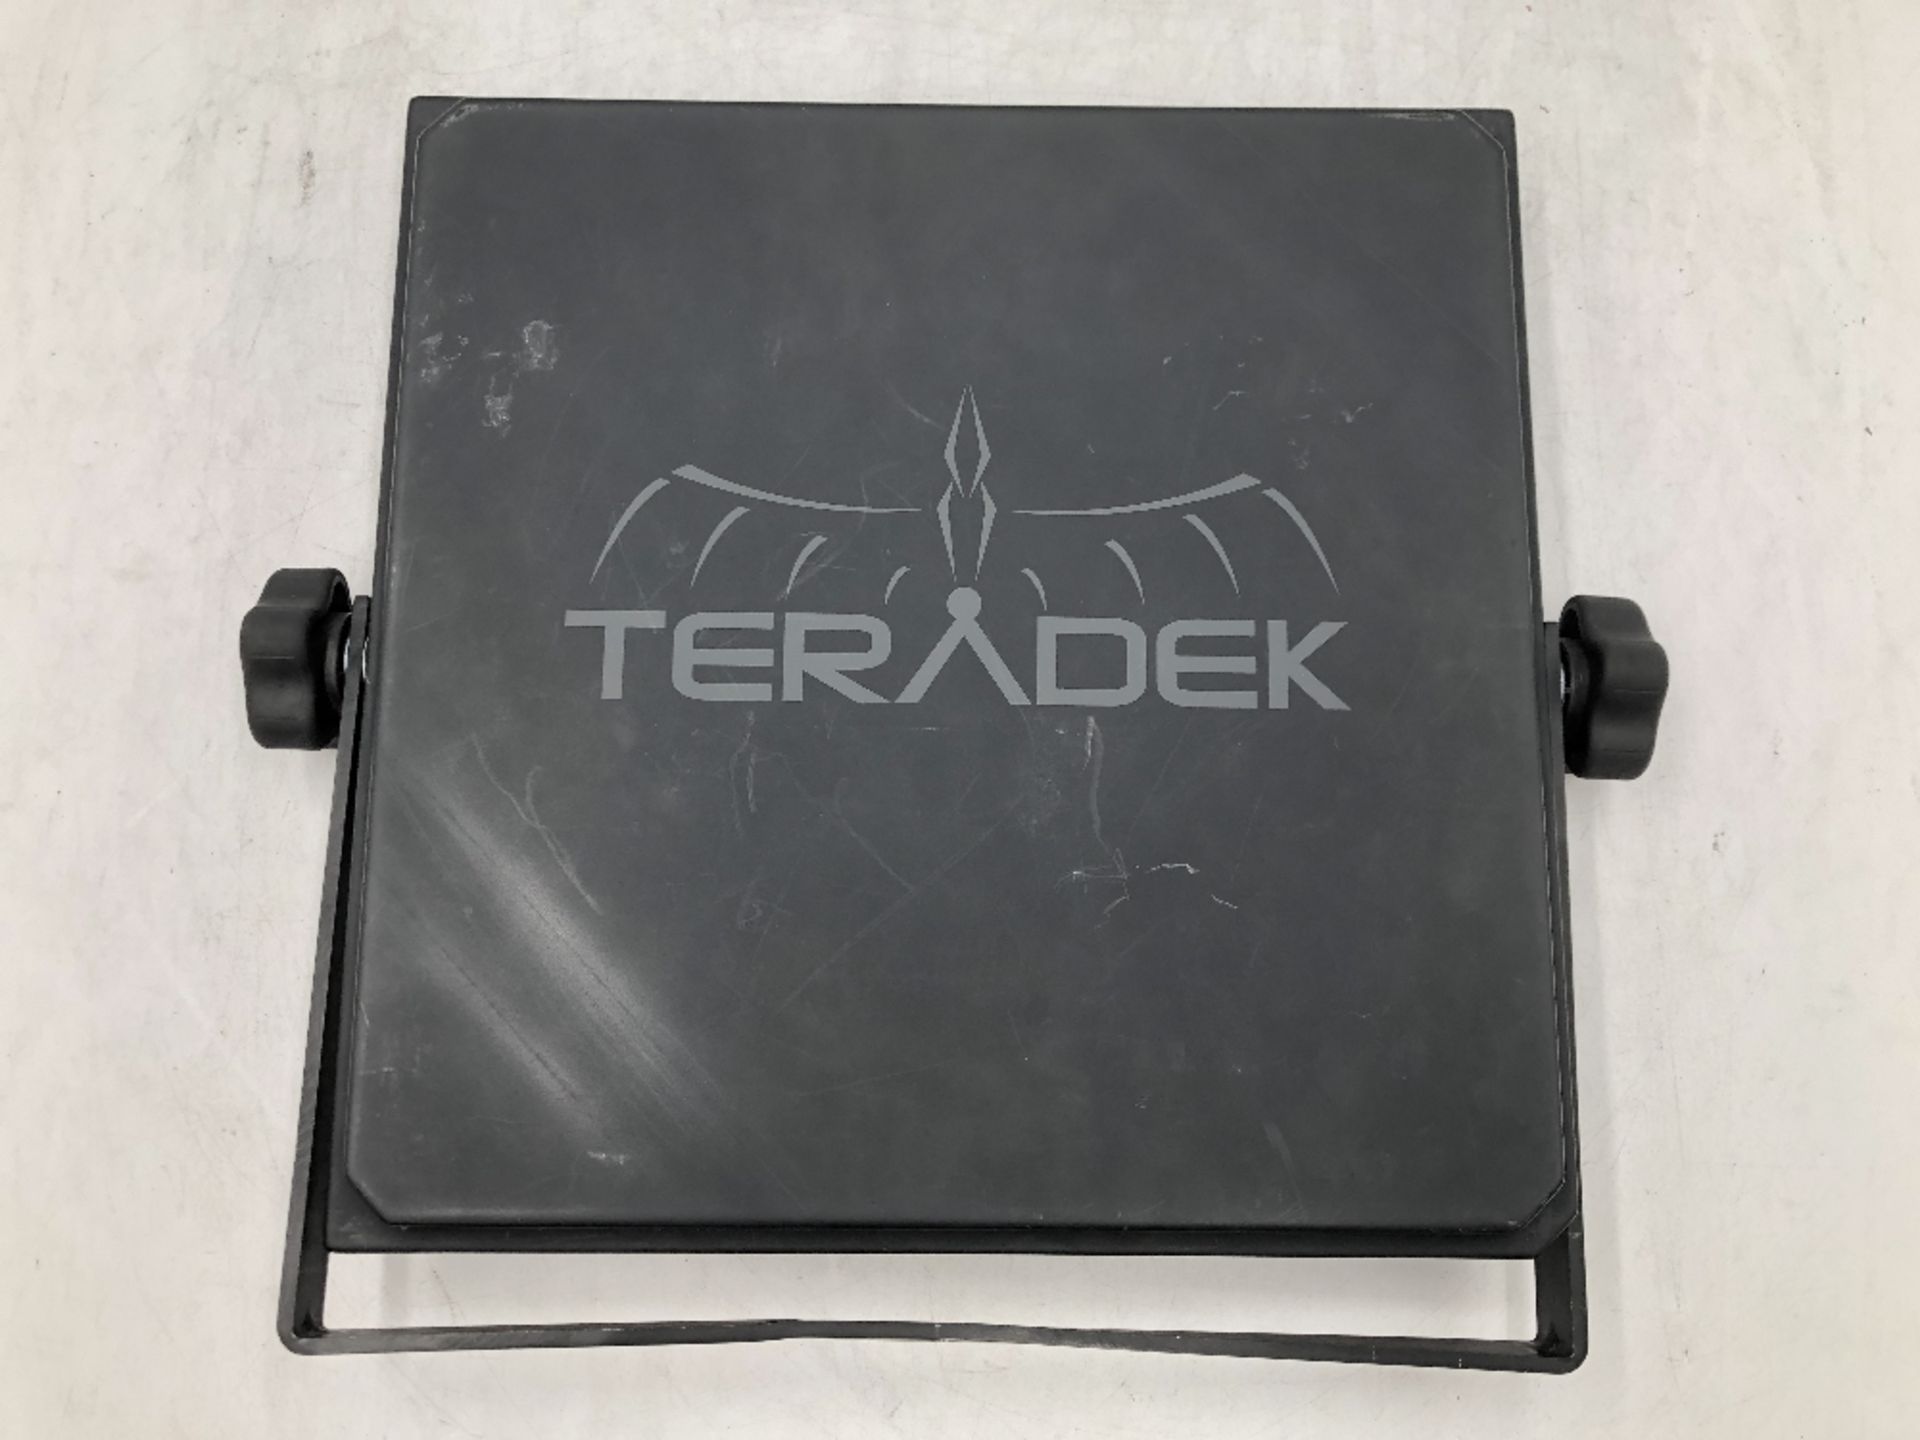 Teradek Bolt 3000 Array Panel/Antenna With Array Mount And Carry Case - Image 2 of 5